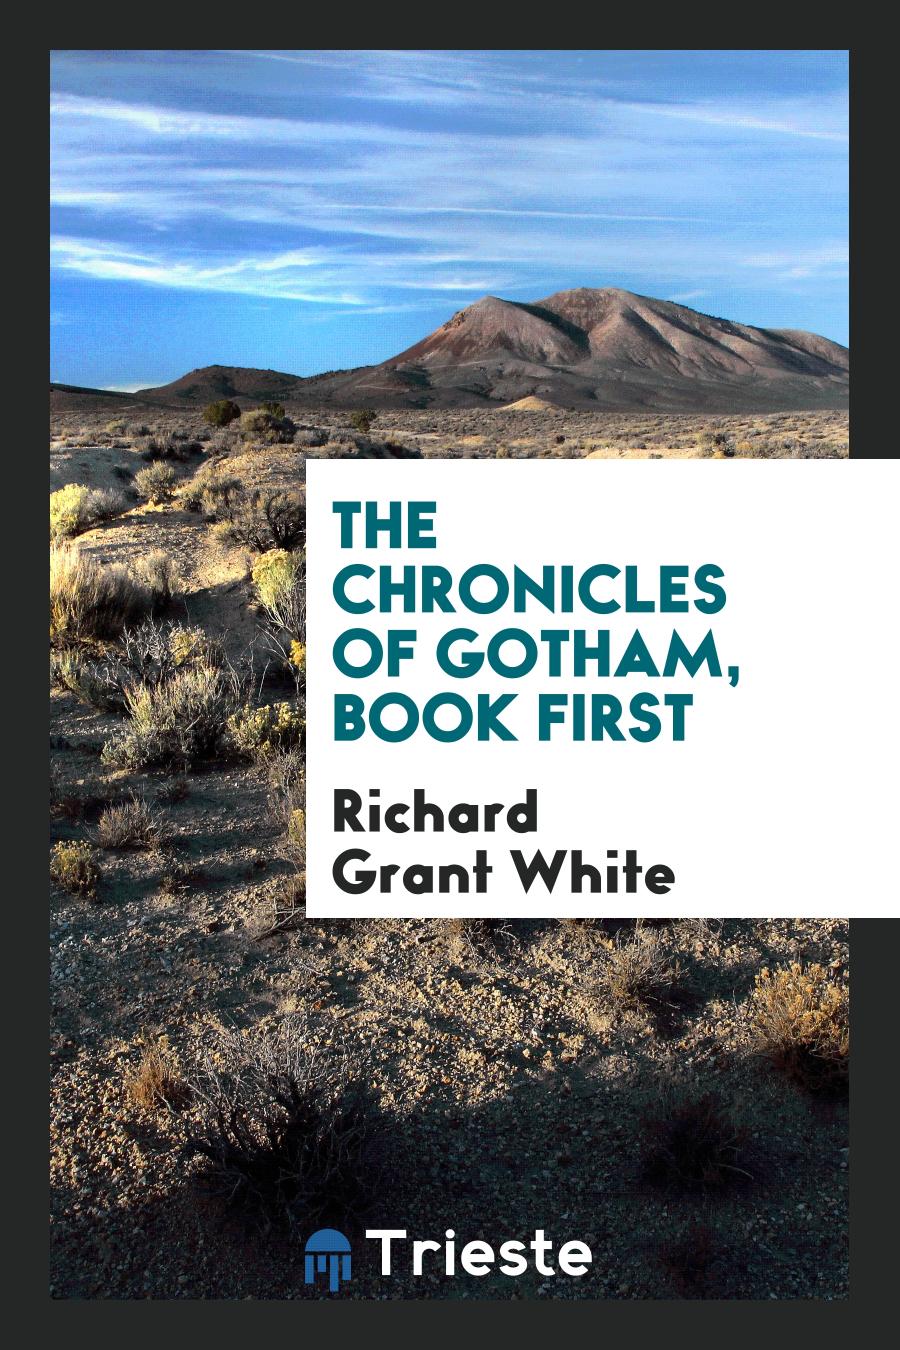 The Chronicles of Gotham, book first